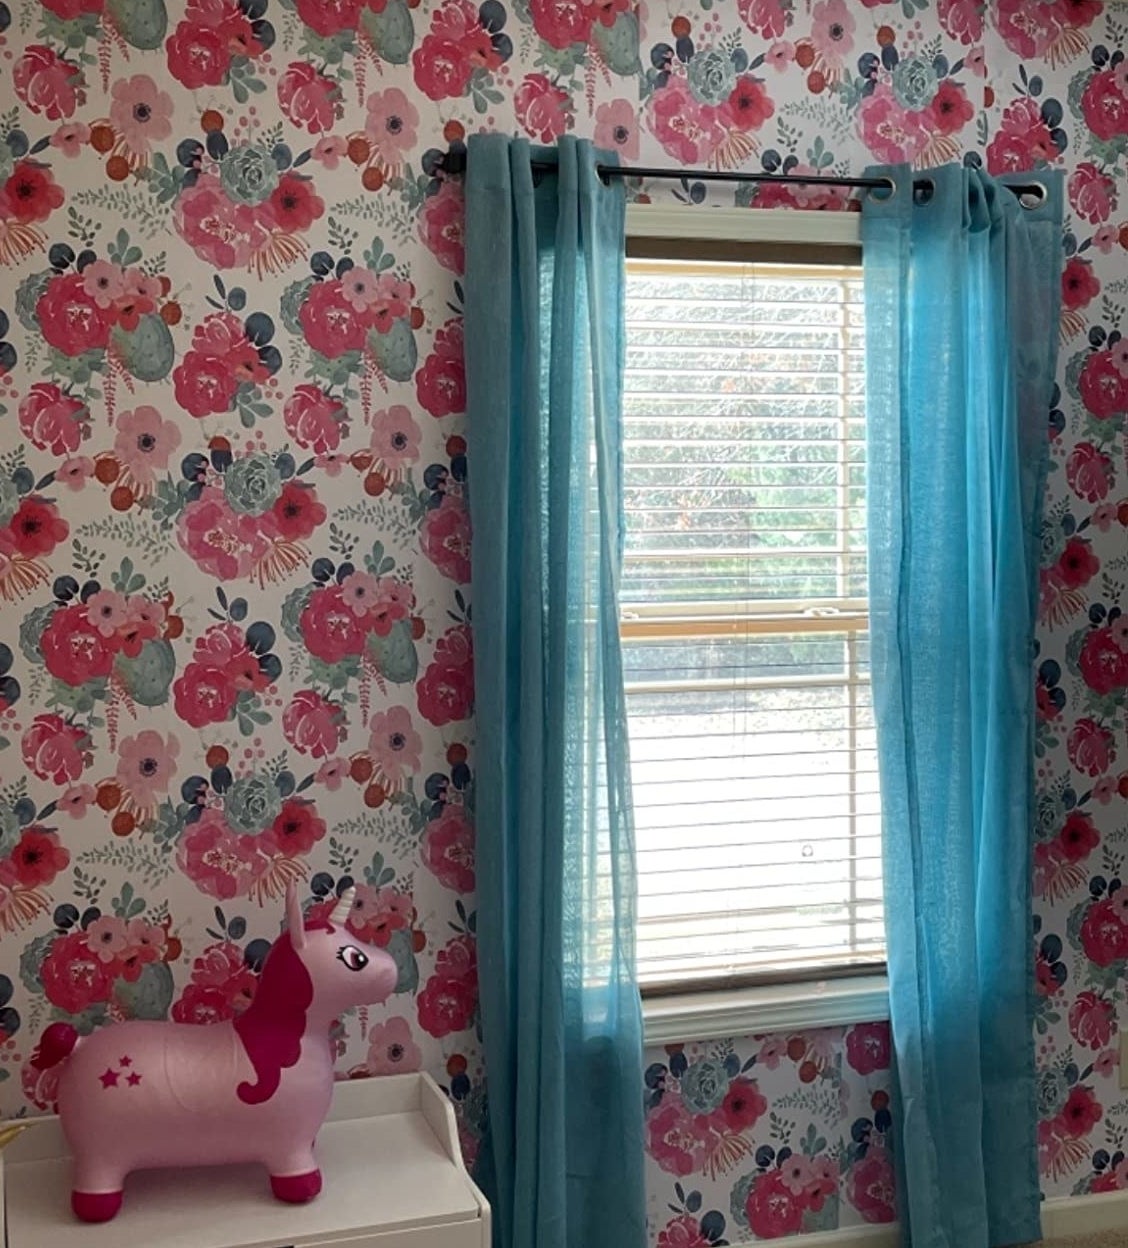 Reviewer image of pink floral wallpaper next to window with blue curtains